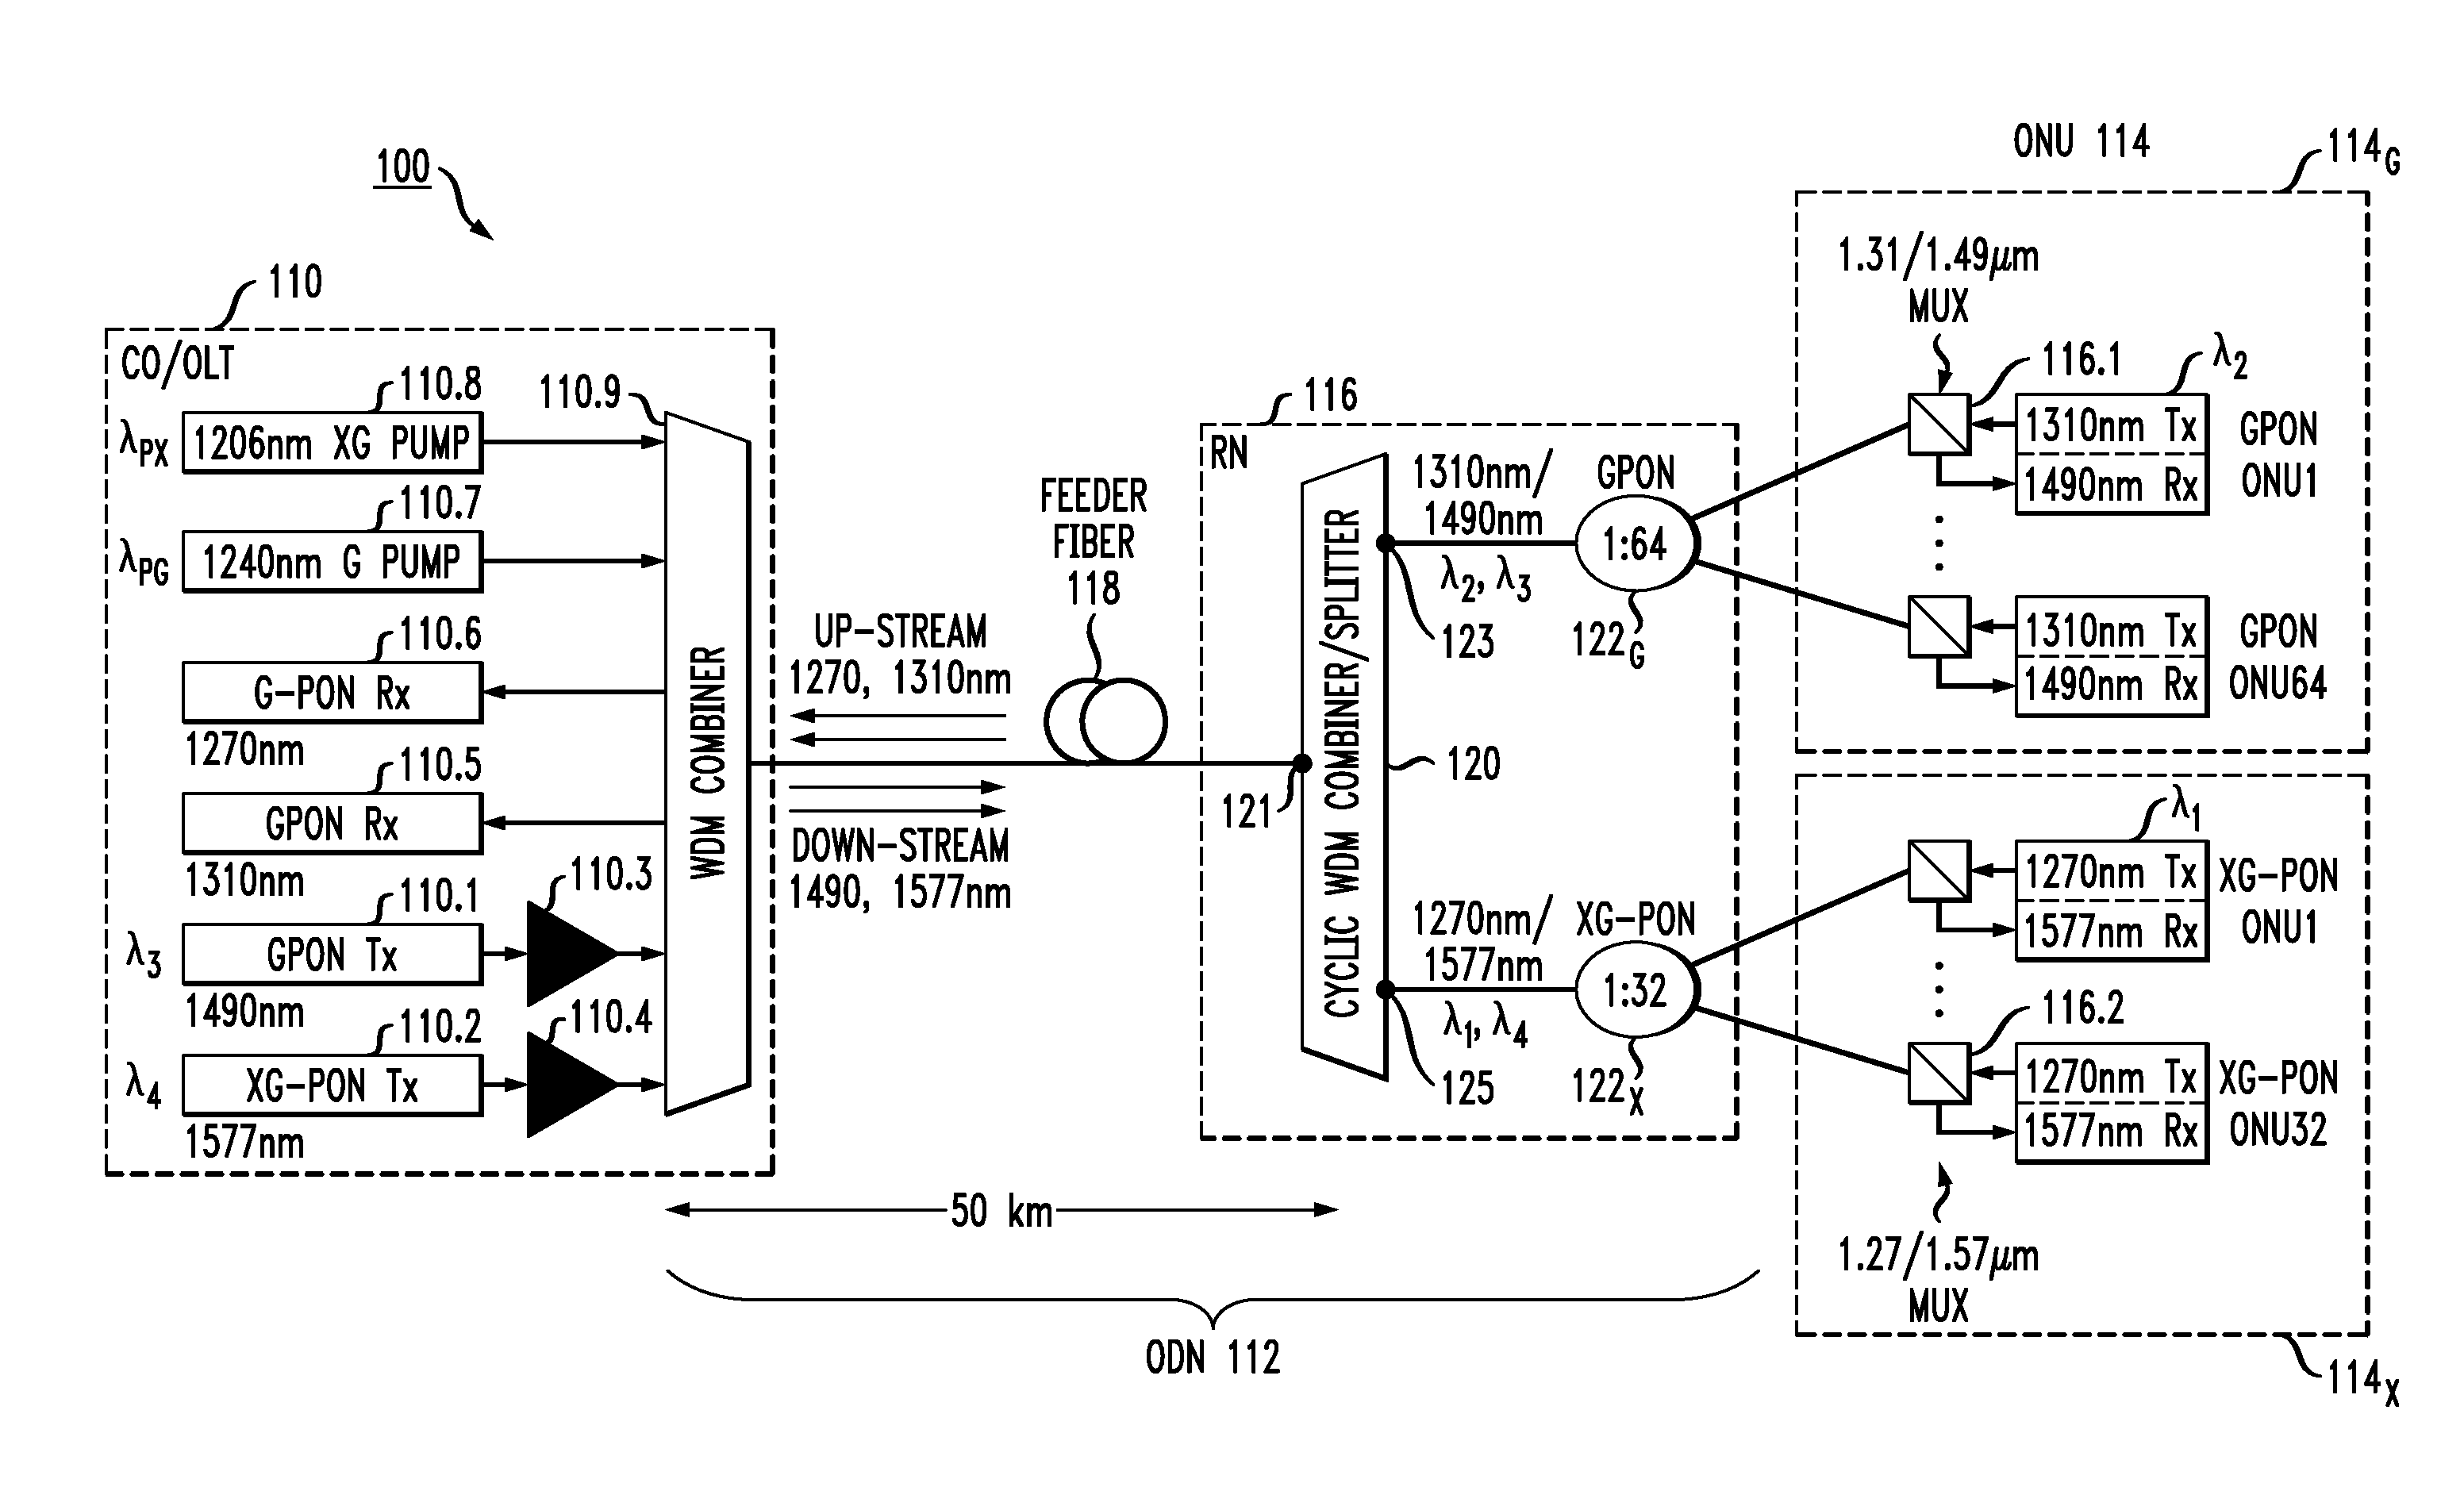 Arrangement for deploying co-existing gpon and xgpon optical communication systems